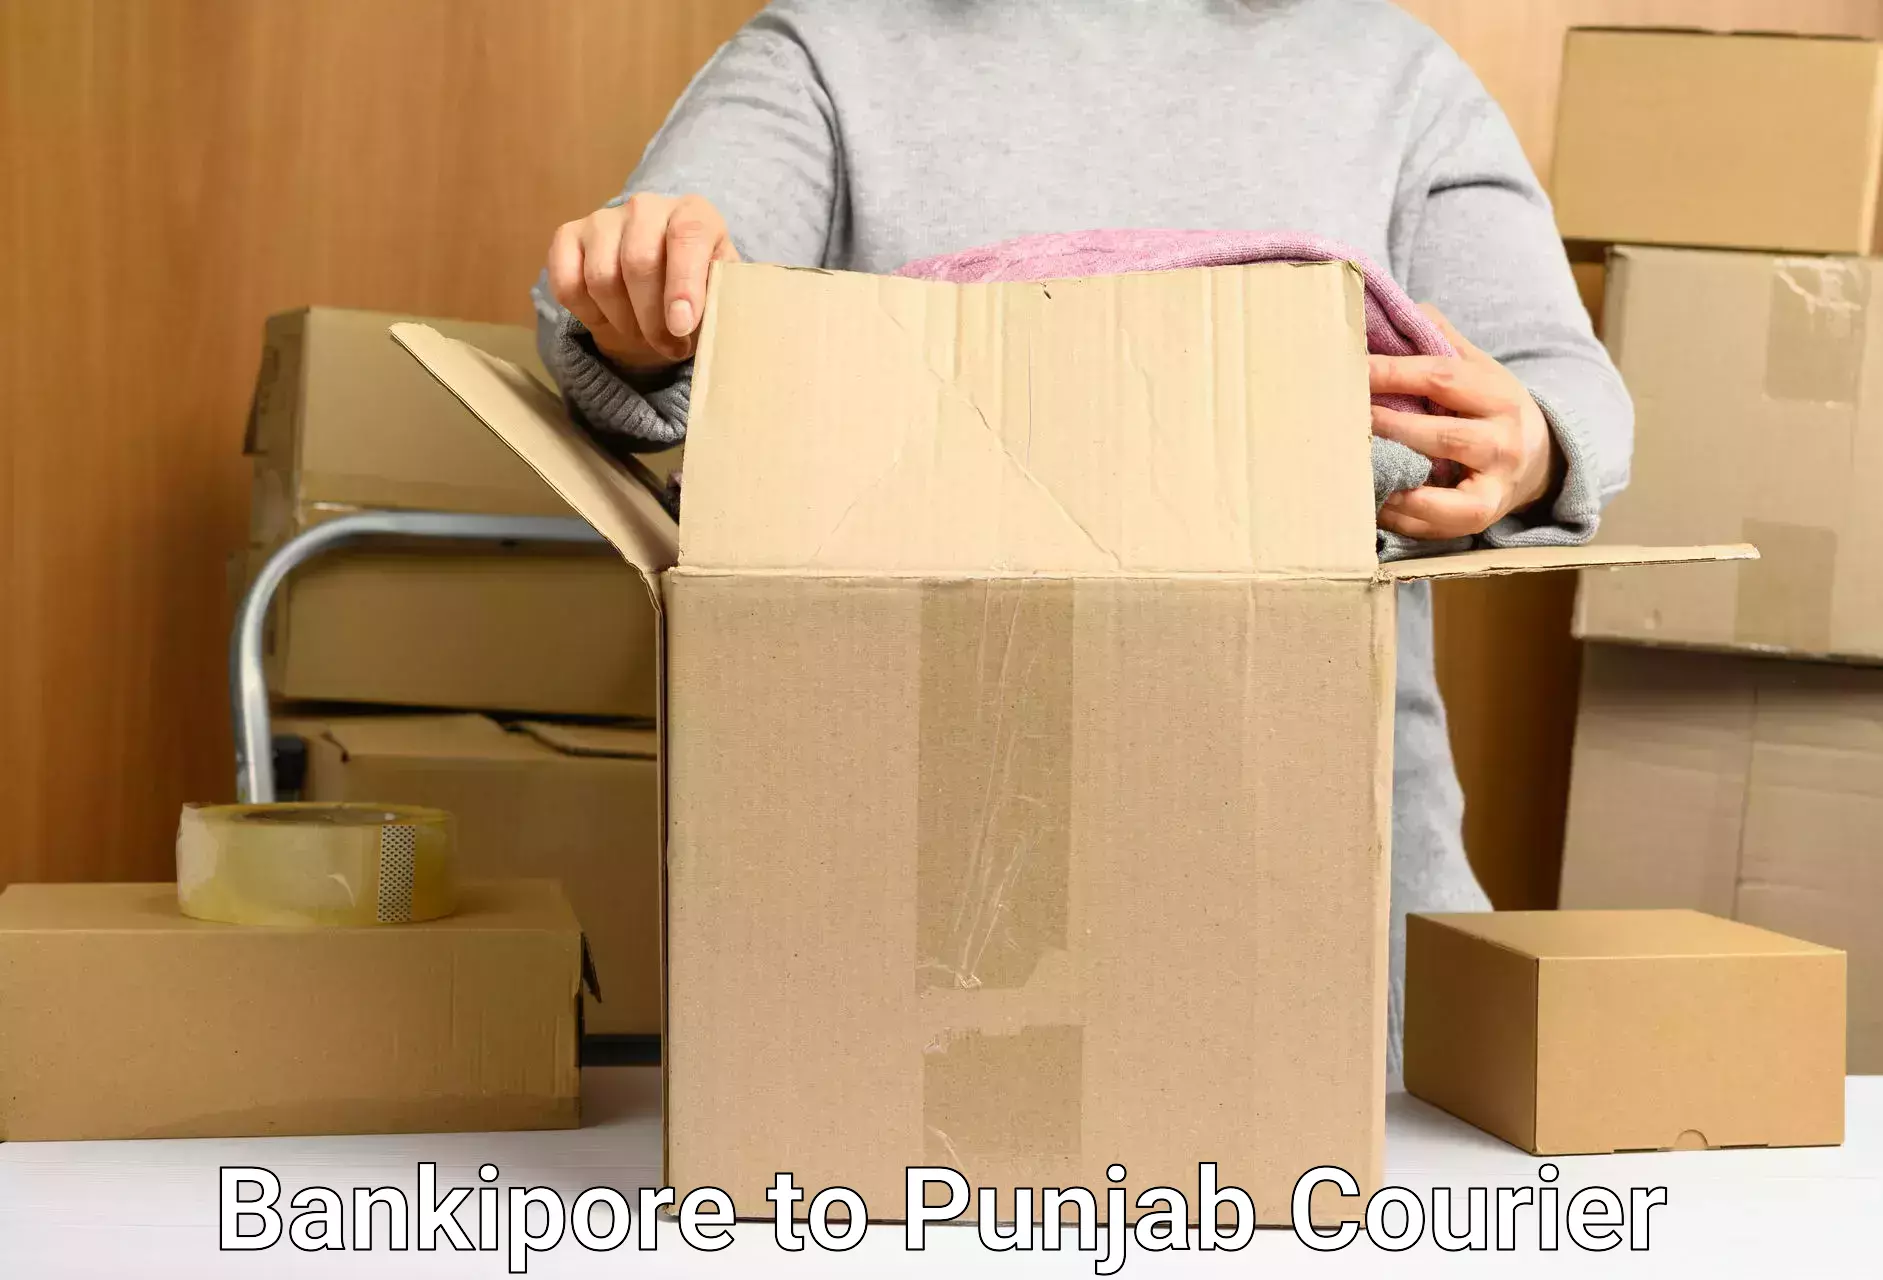 Fast delivery service Bankipore to Punjab